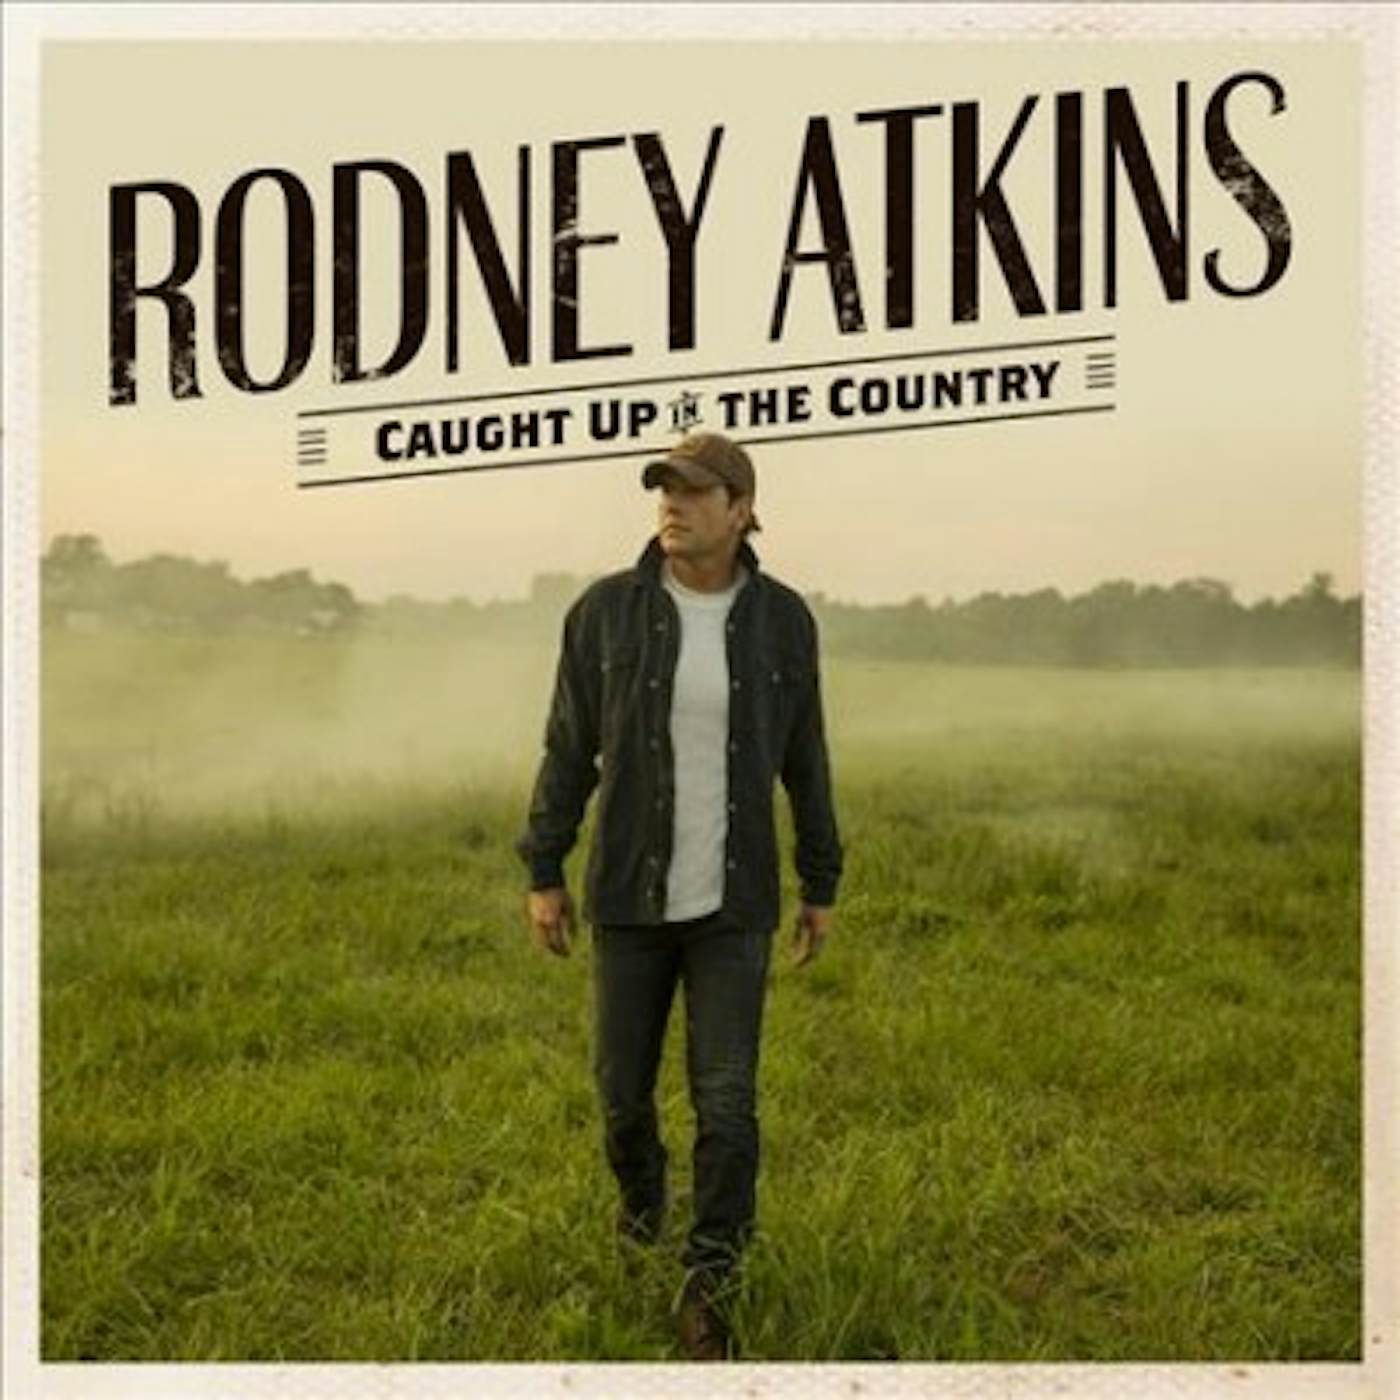 Rodney Atkins Caught Up in The Country Vinyl Record